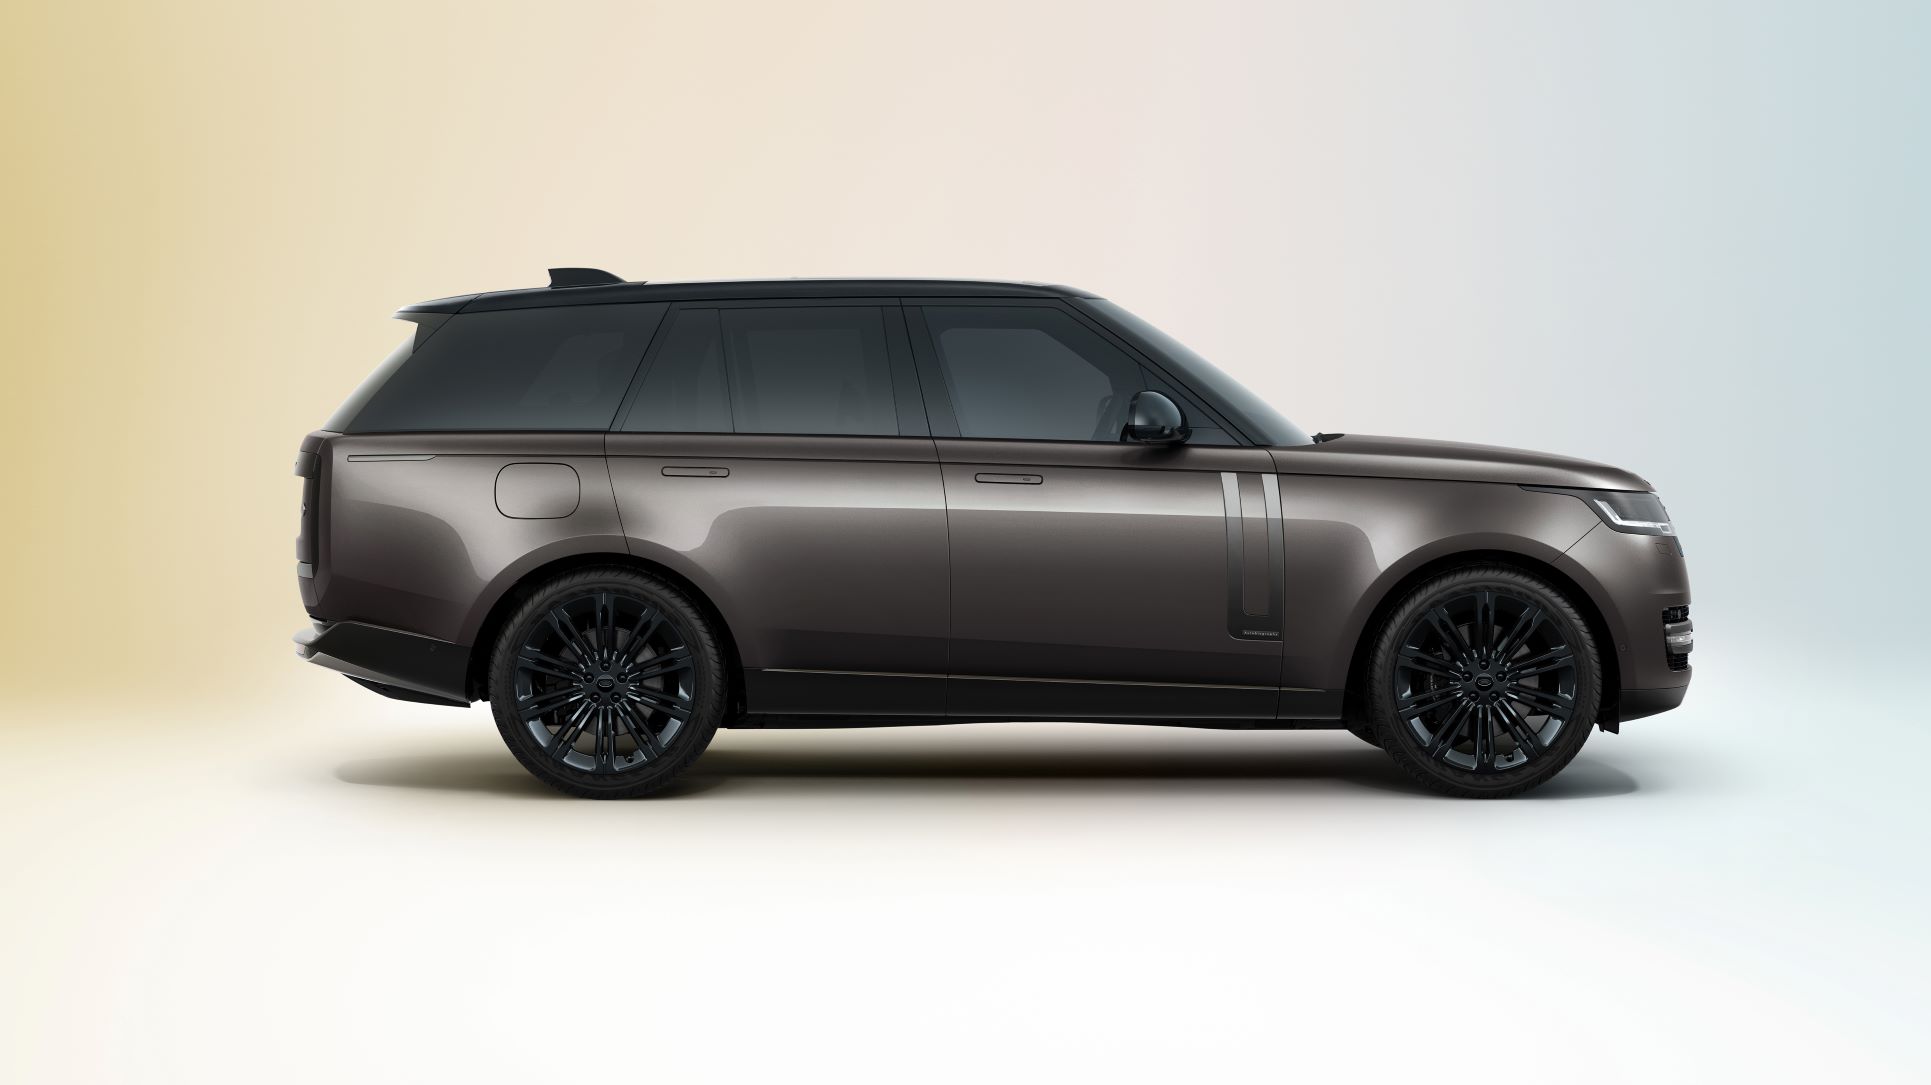 What's the Difference Between a Range Rover and a Land Rover Discovery?